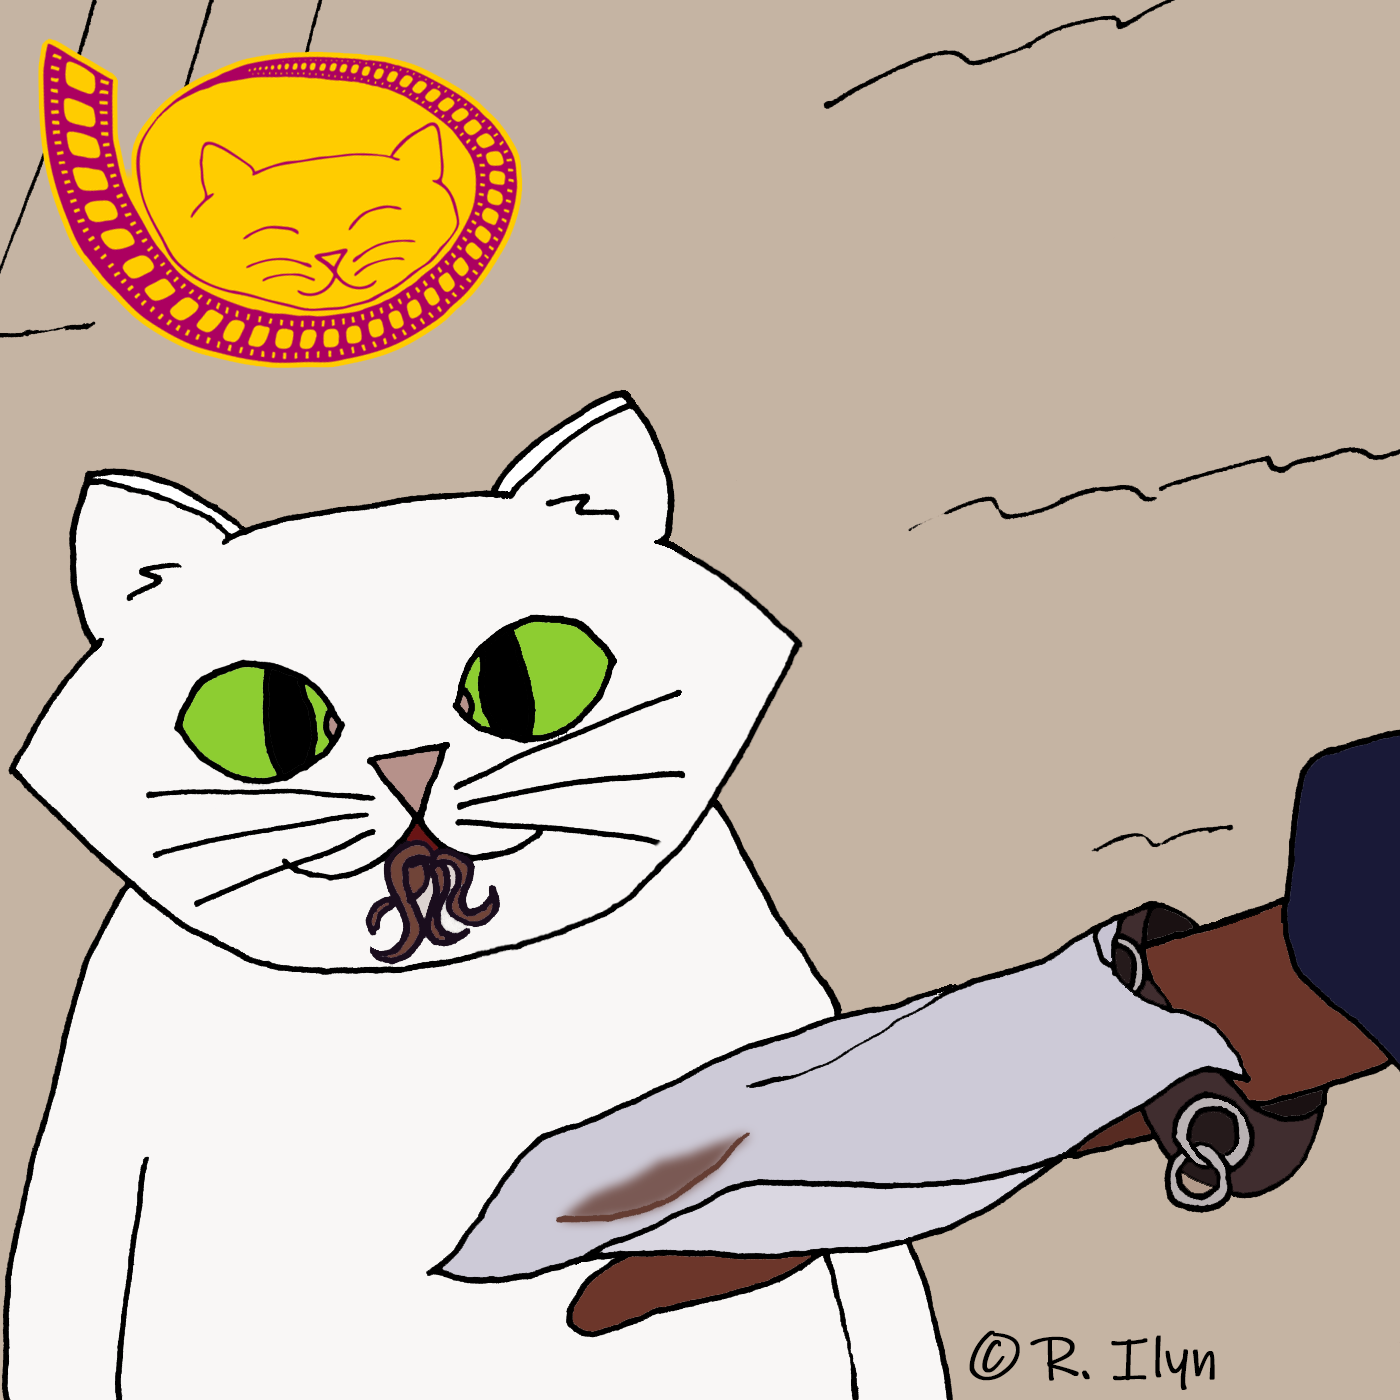 Illustration of white cat eating tentacles from Breakin' 2: Electric Boogaloo